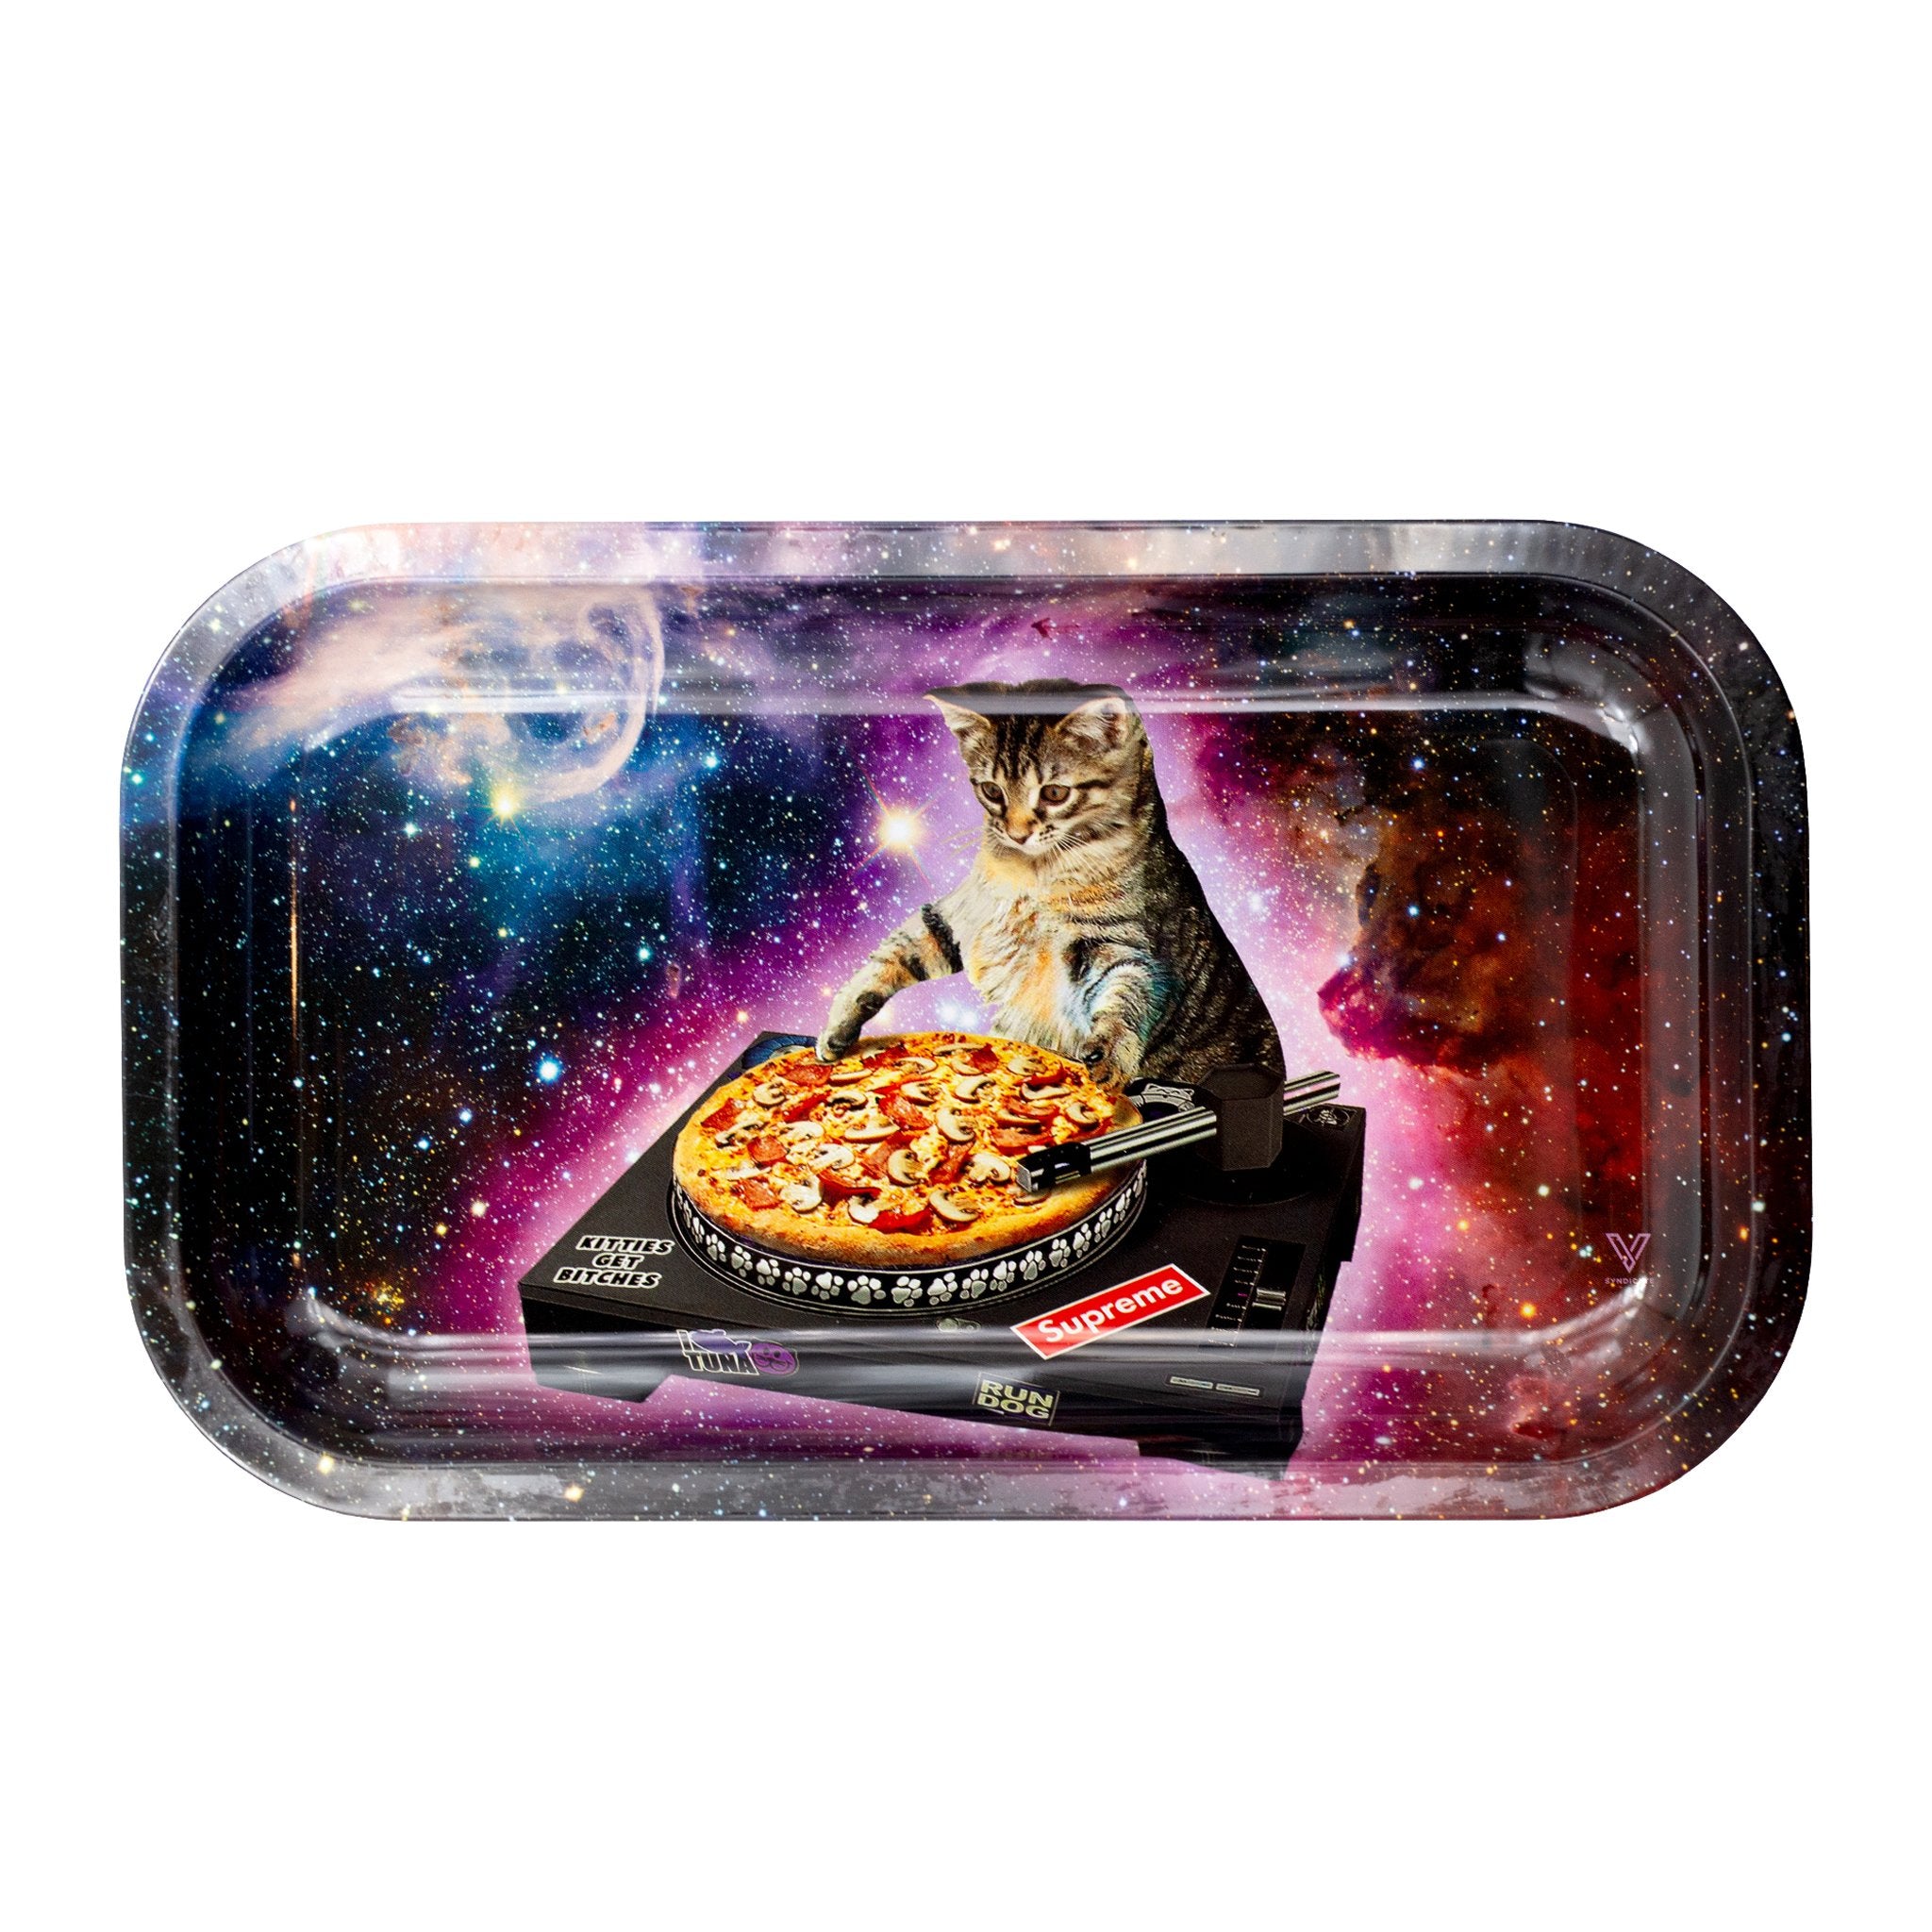 V Syndicate Pussy Vinyl Metal Rolling Tray 11 Inches